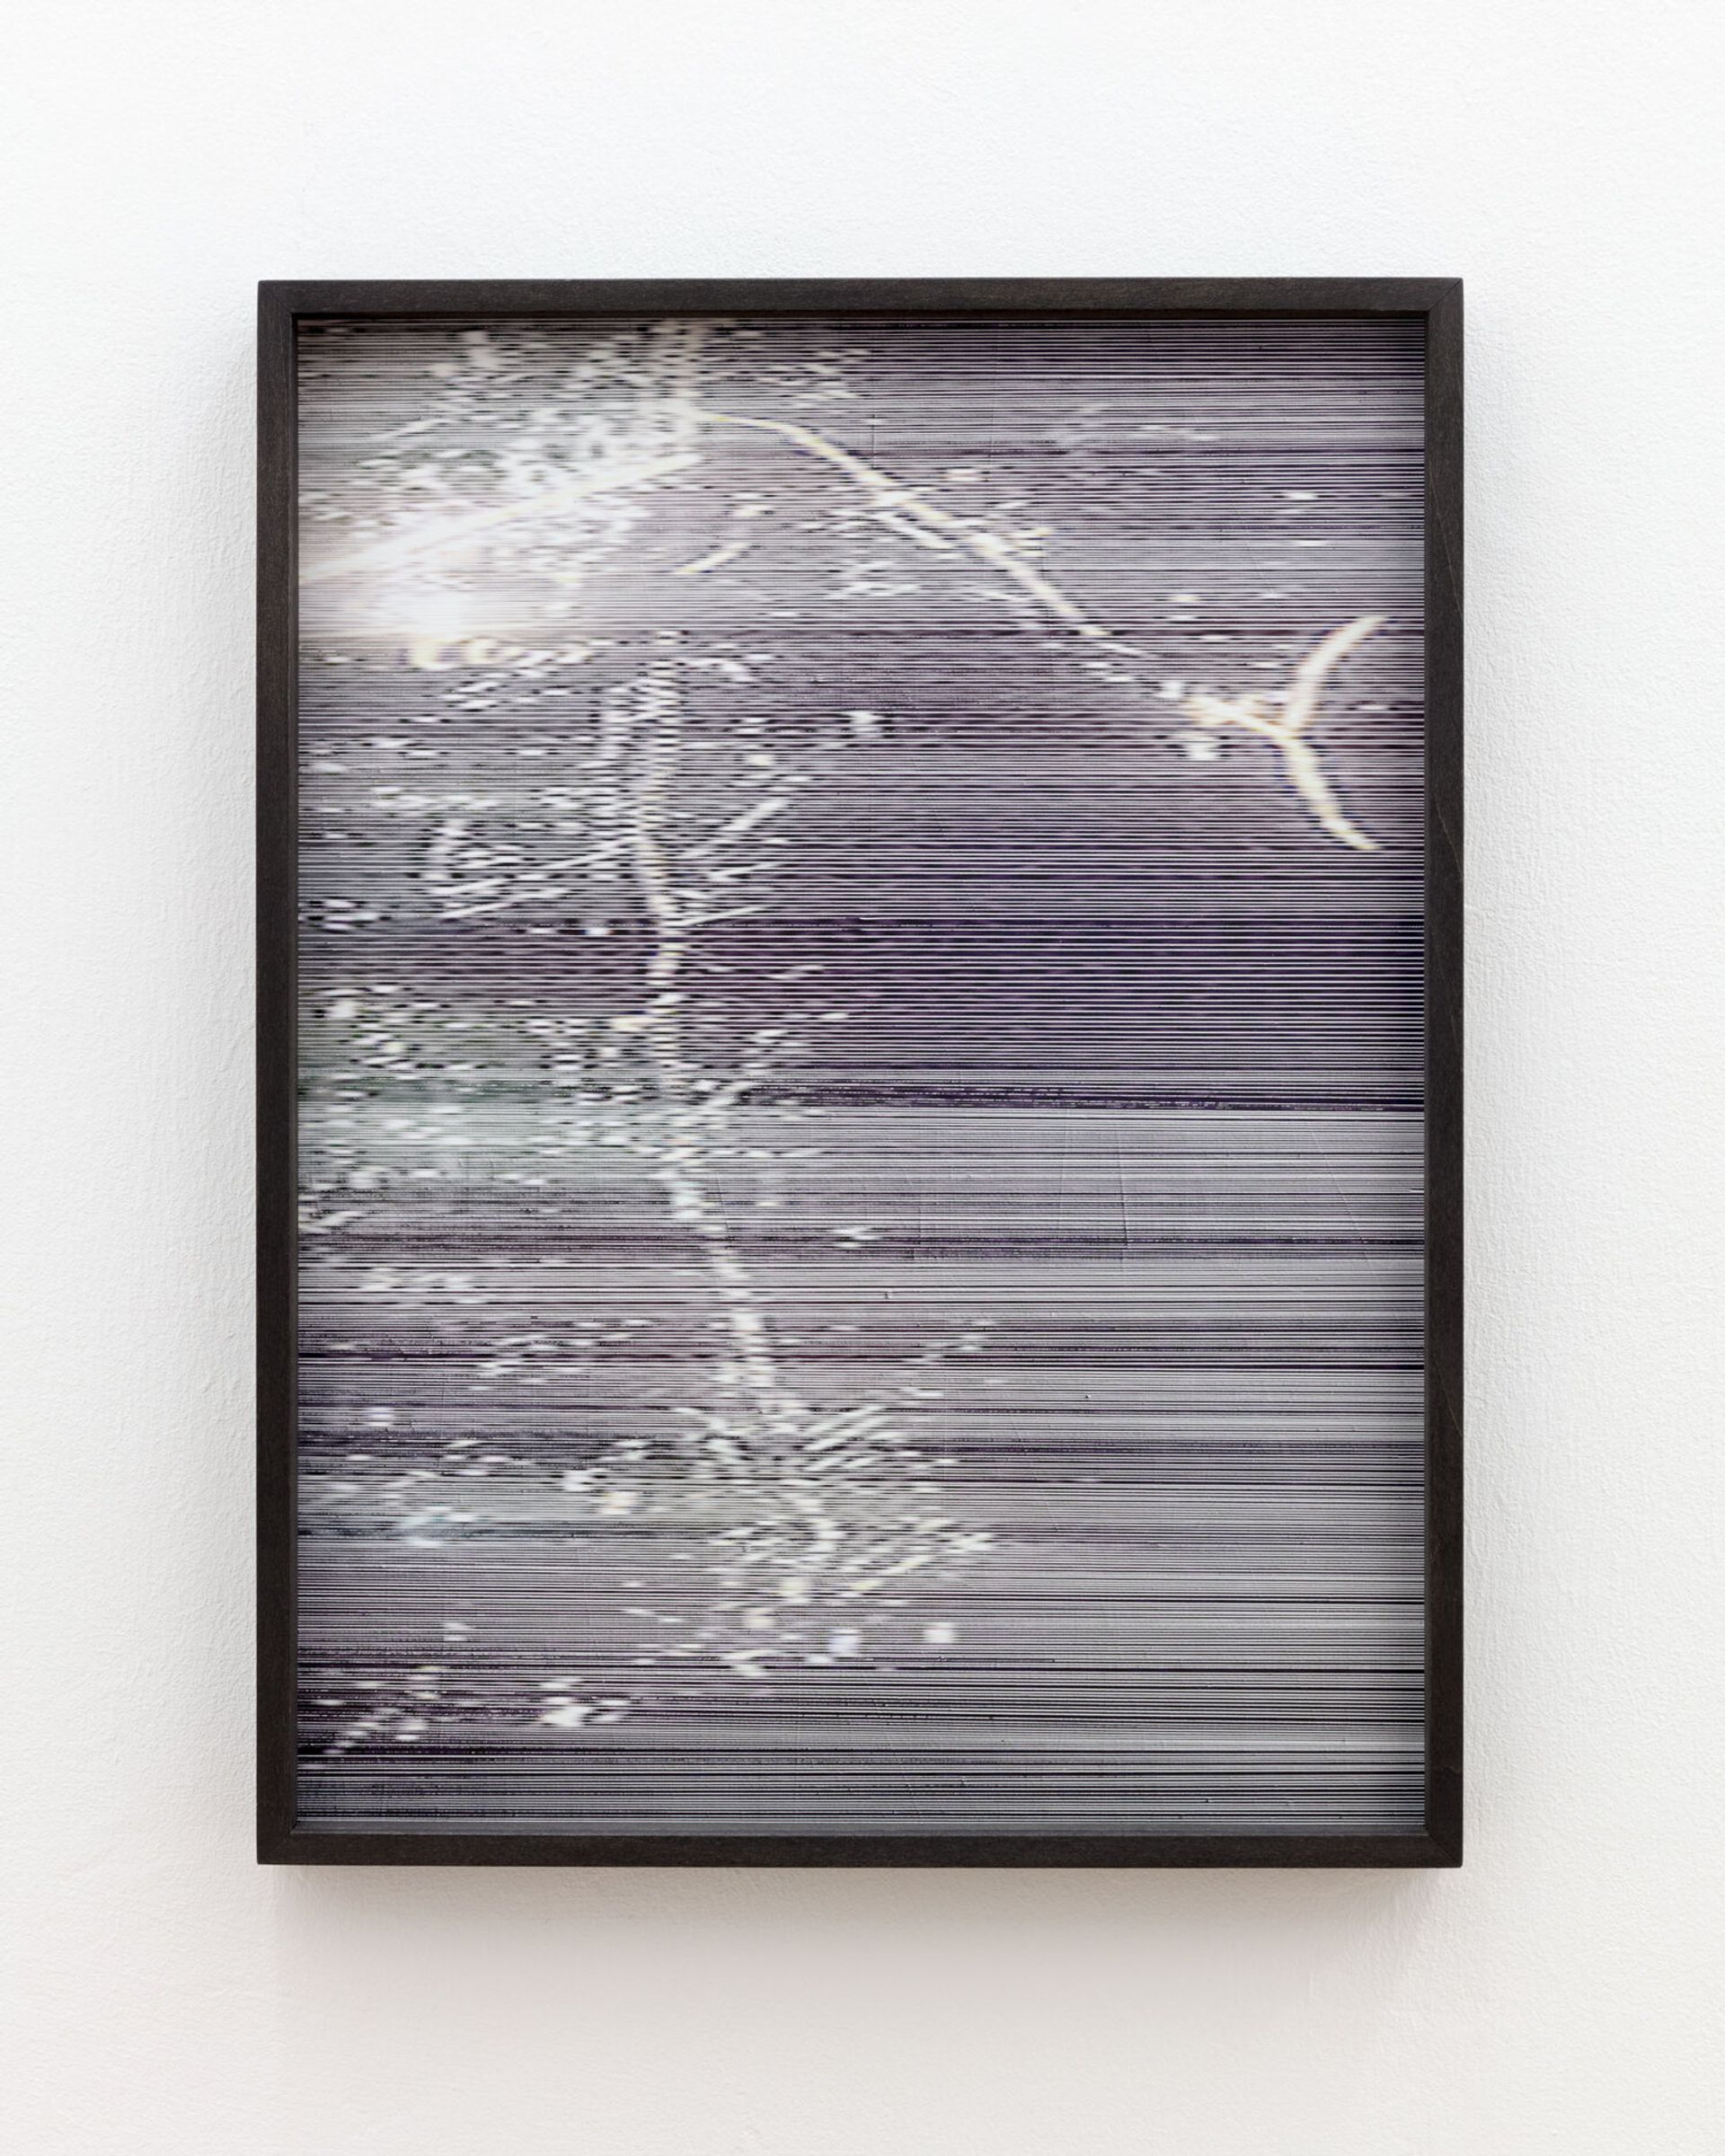 Anna Vogel, Electric Mountains III, 2019
pigment print, scratched, framed in lime, anthracite, artglass
40 × 30 cm
unique 

Photo: Sebastian Kissel